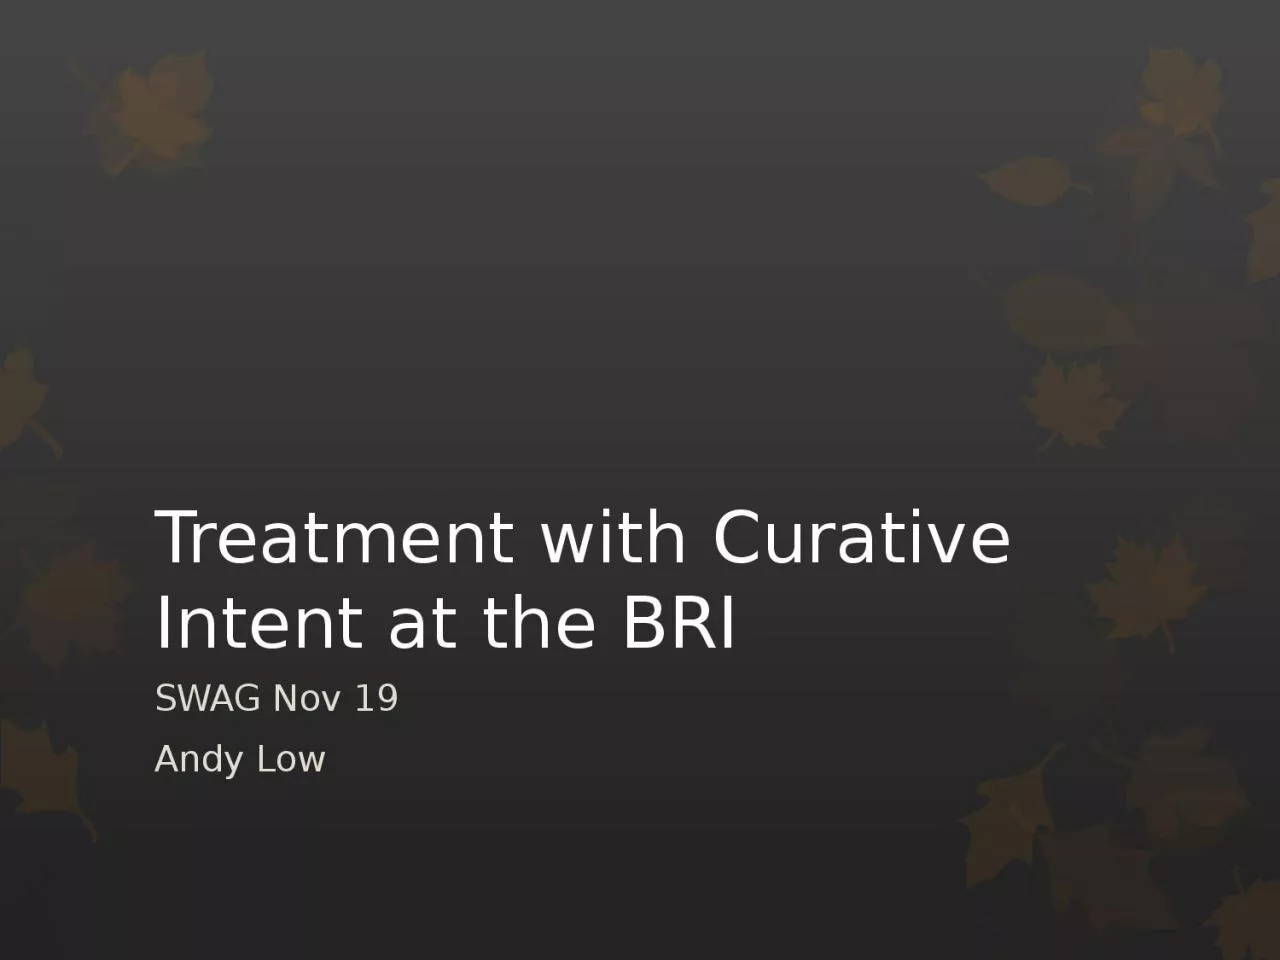 Treatment with Curative Intent at the BRI